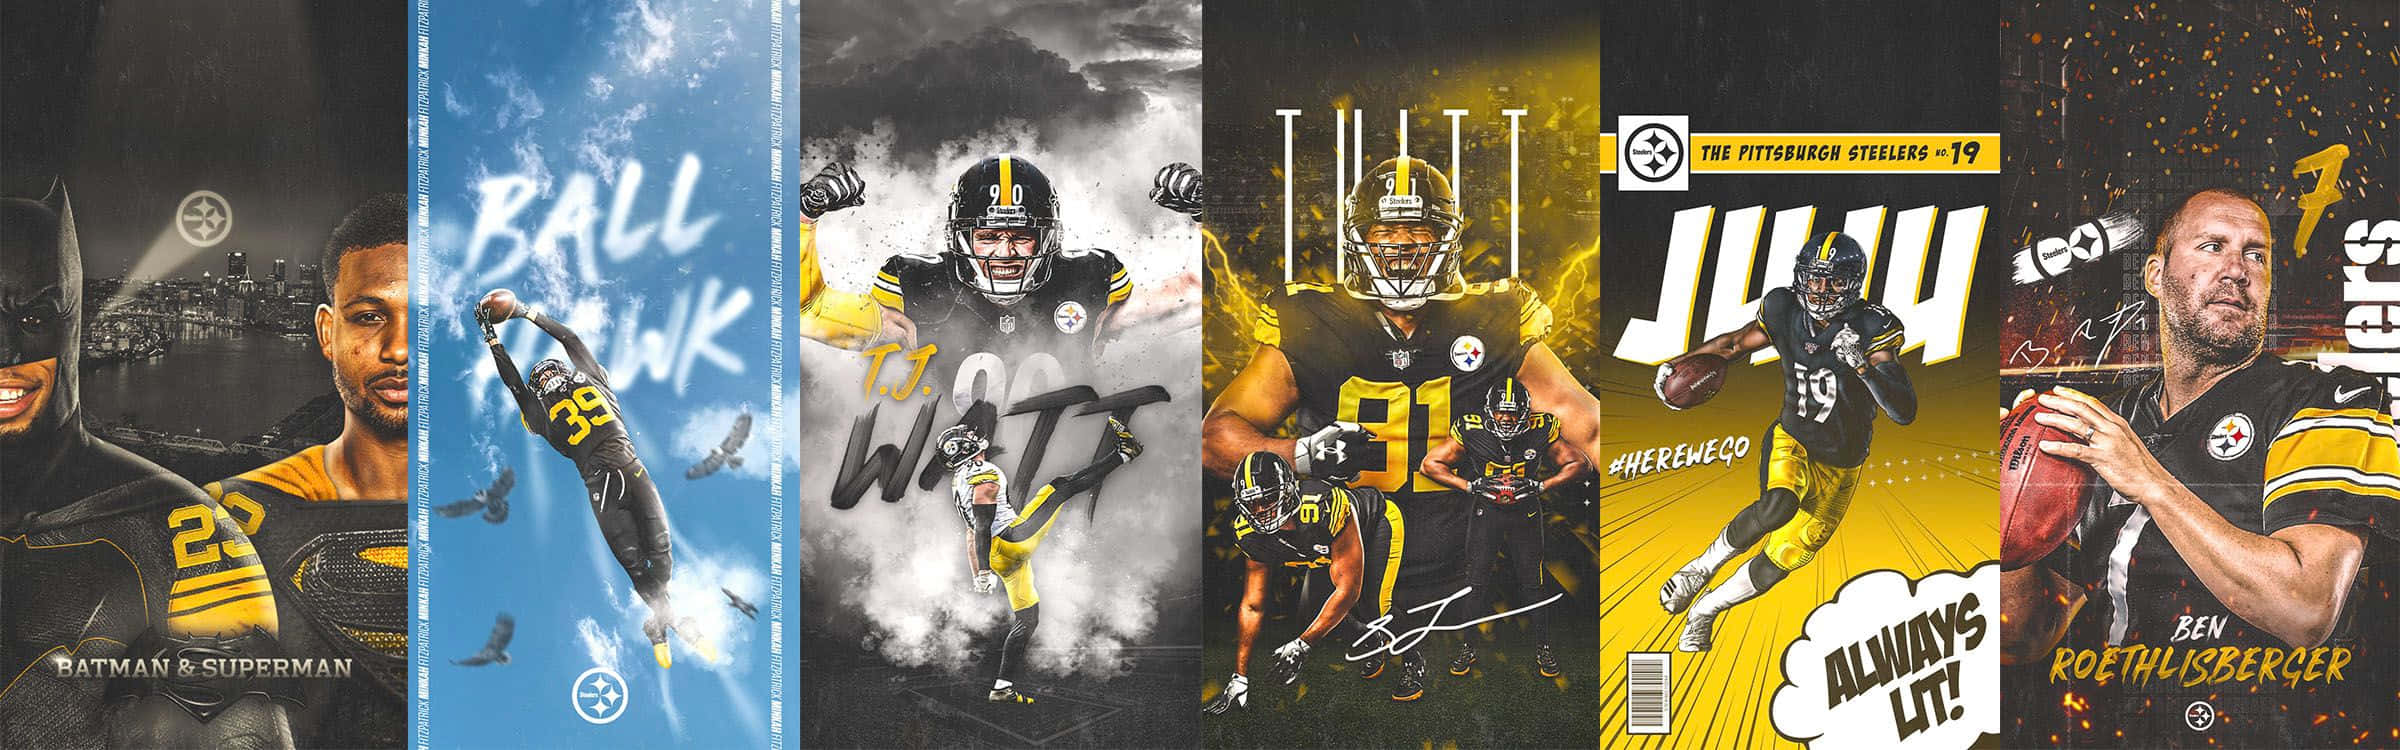 Pittsburgh Steelers Logo Collage Wallpaper